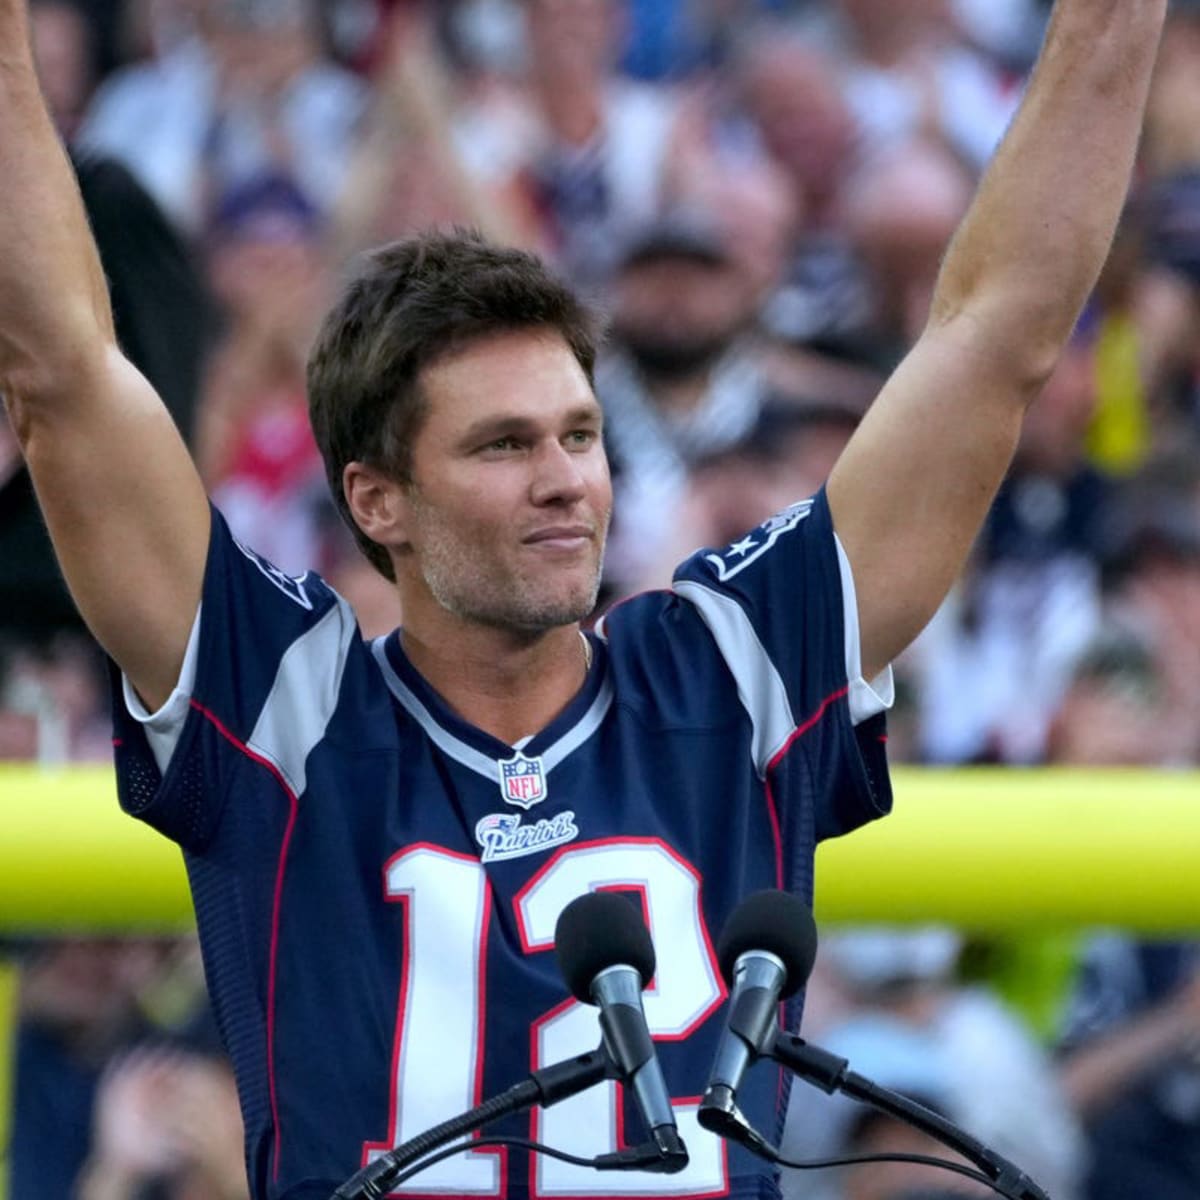 Patriots' quarterback Tom Brady almost had a different jersey number